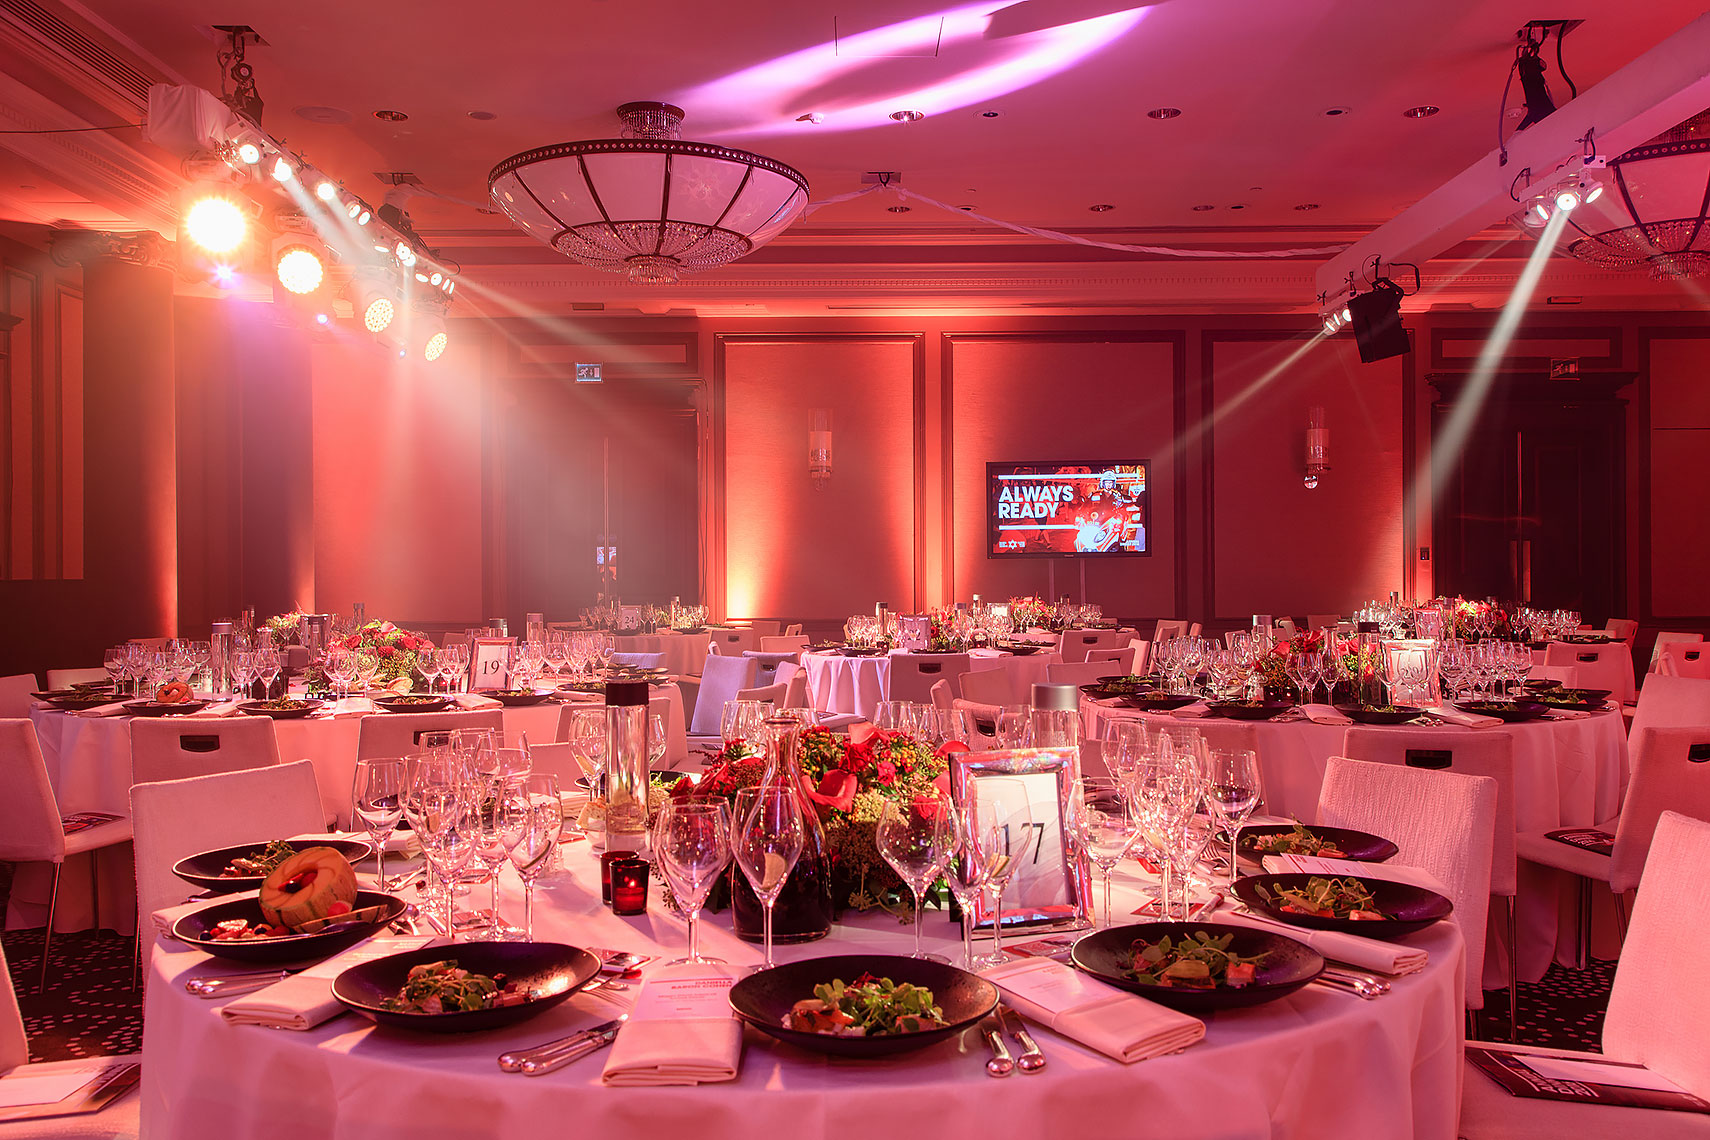 Colourful ballroom set for fancy evening event with flowers and decorations under red lighting